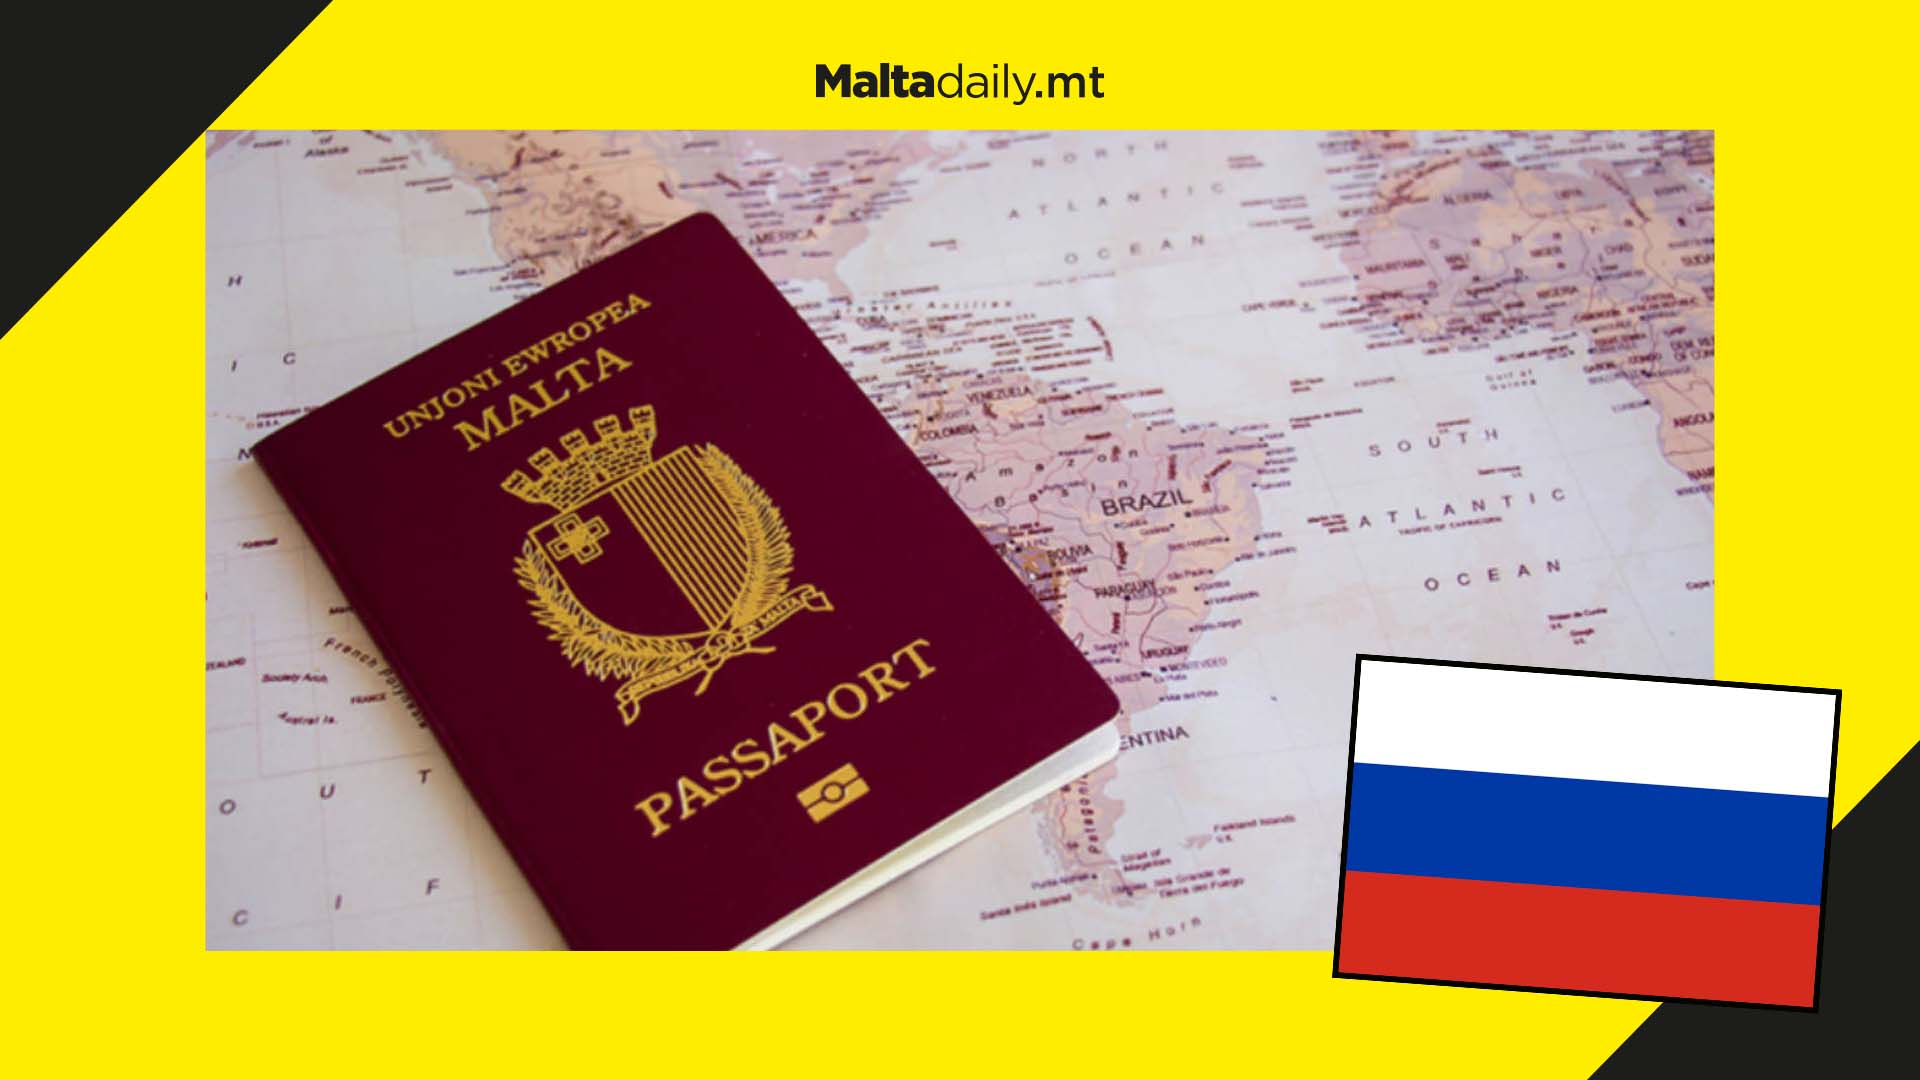 Russian’s Maltese citizenship retracted after name listed on US sanctions list